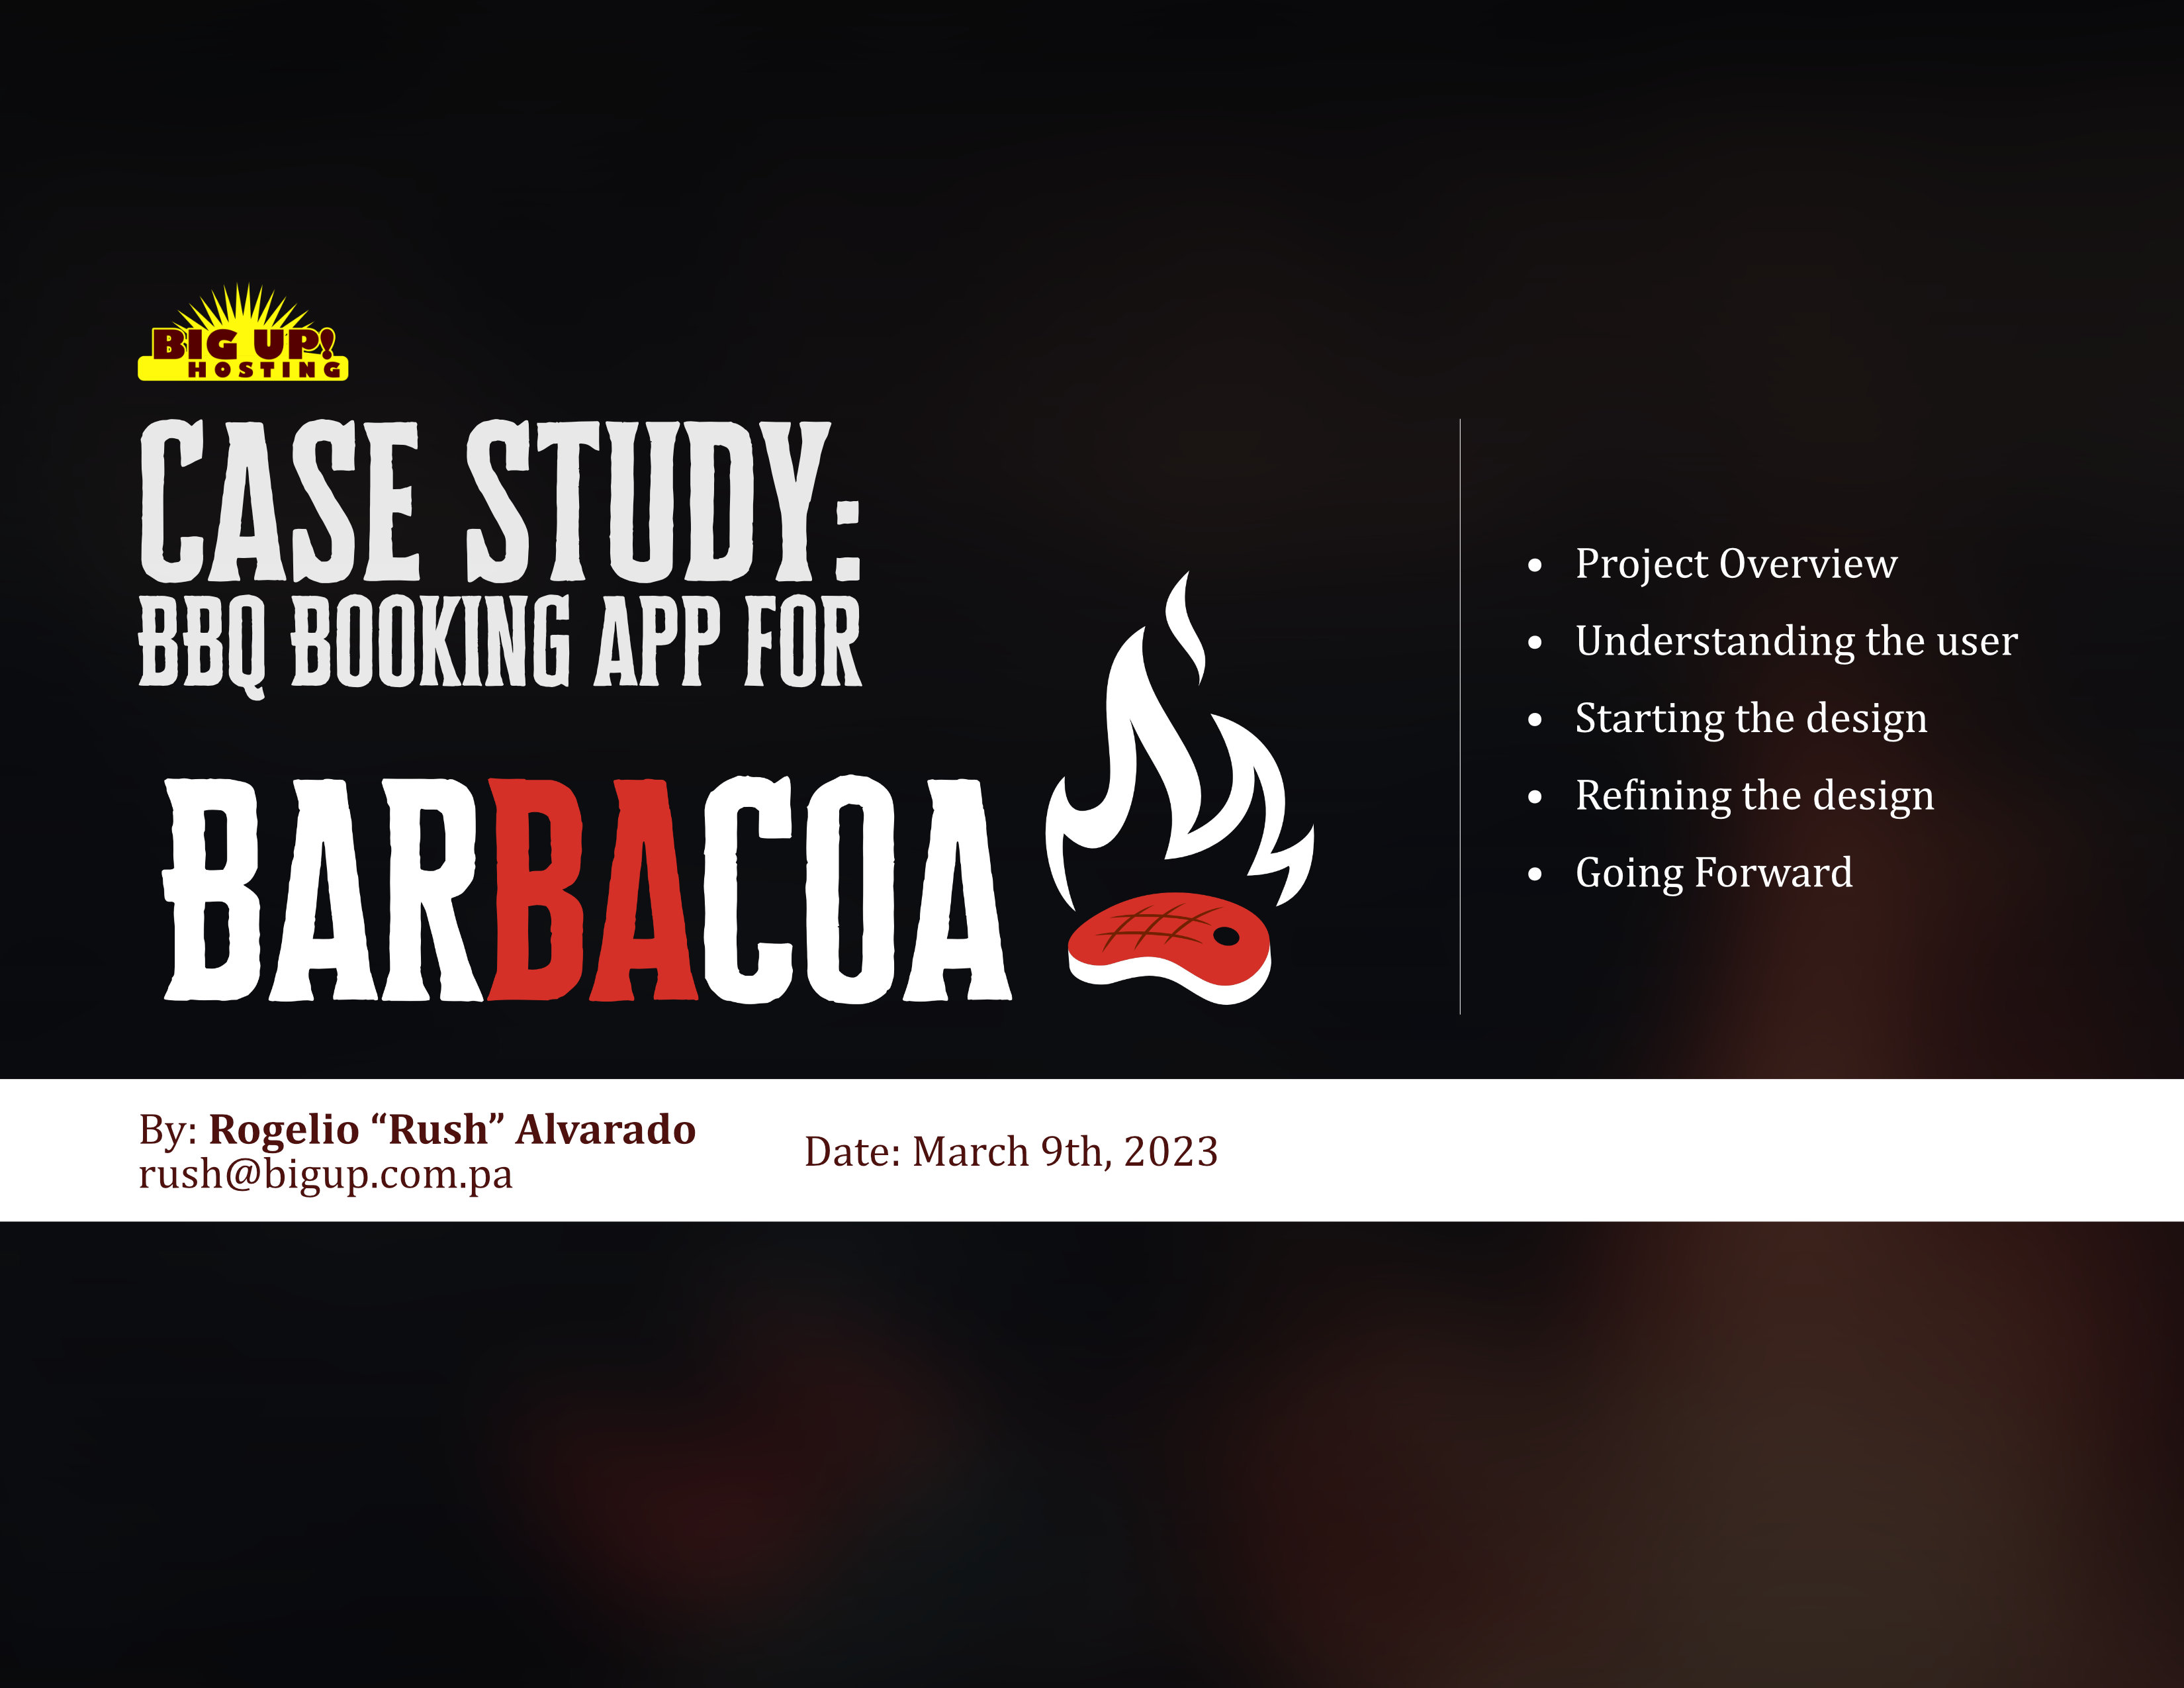 Case Study: BBQ Booking App for Barbacoa